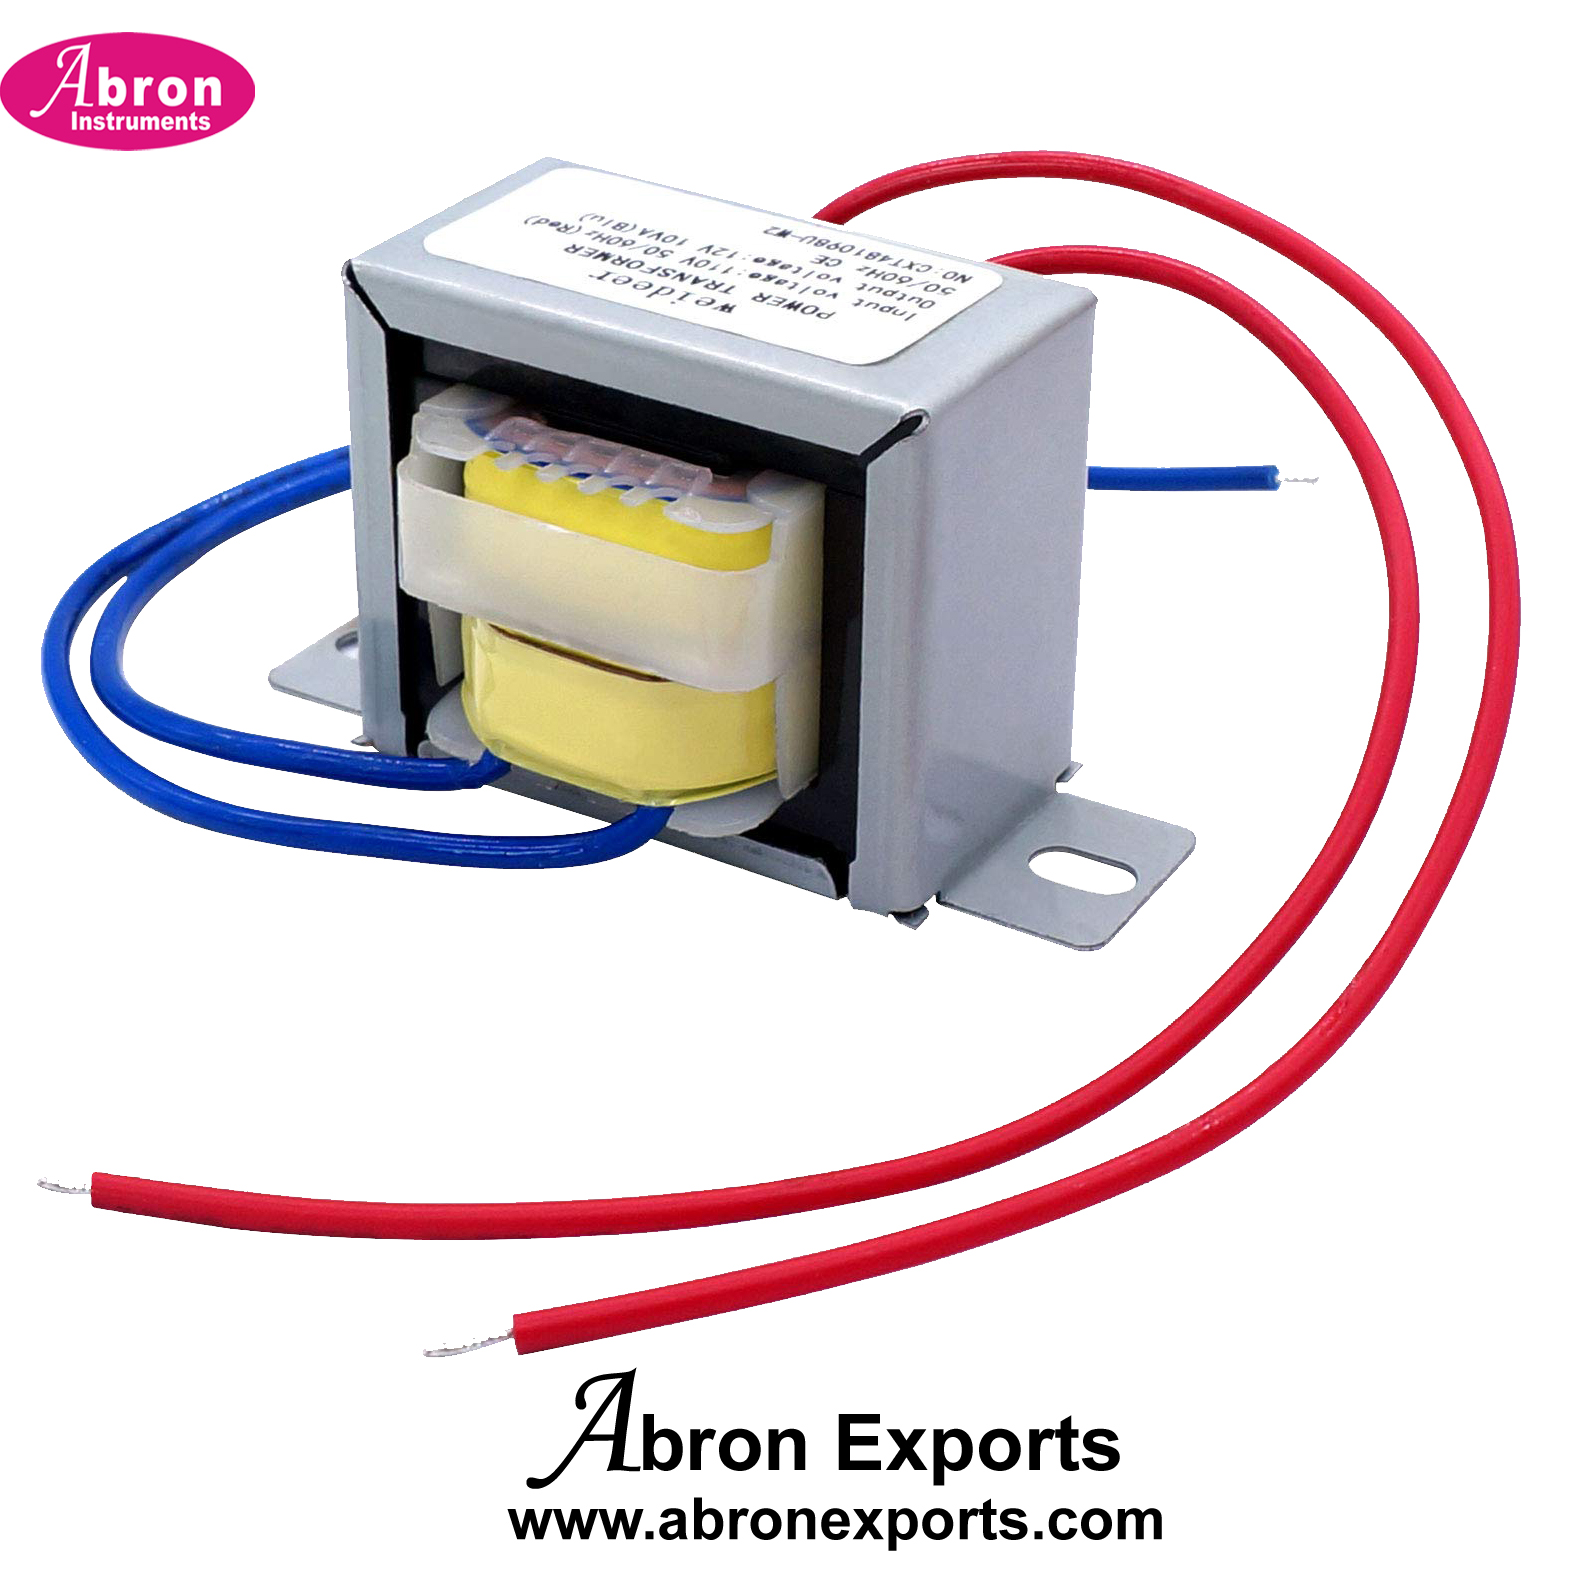 Electric Electronic Spare Transformer Small for Demo or SMPS Transformer Abron AE-1224TxM 